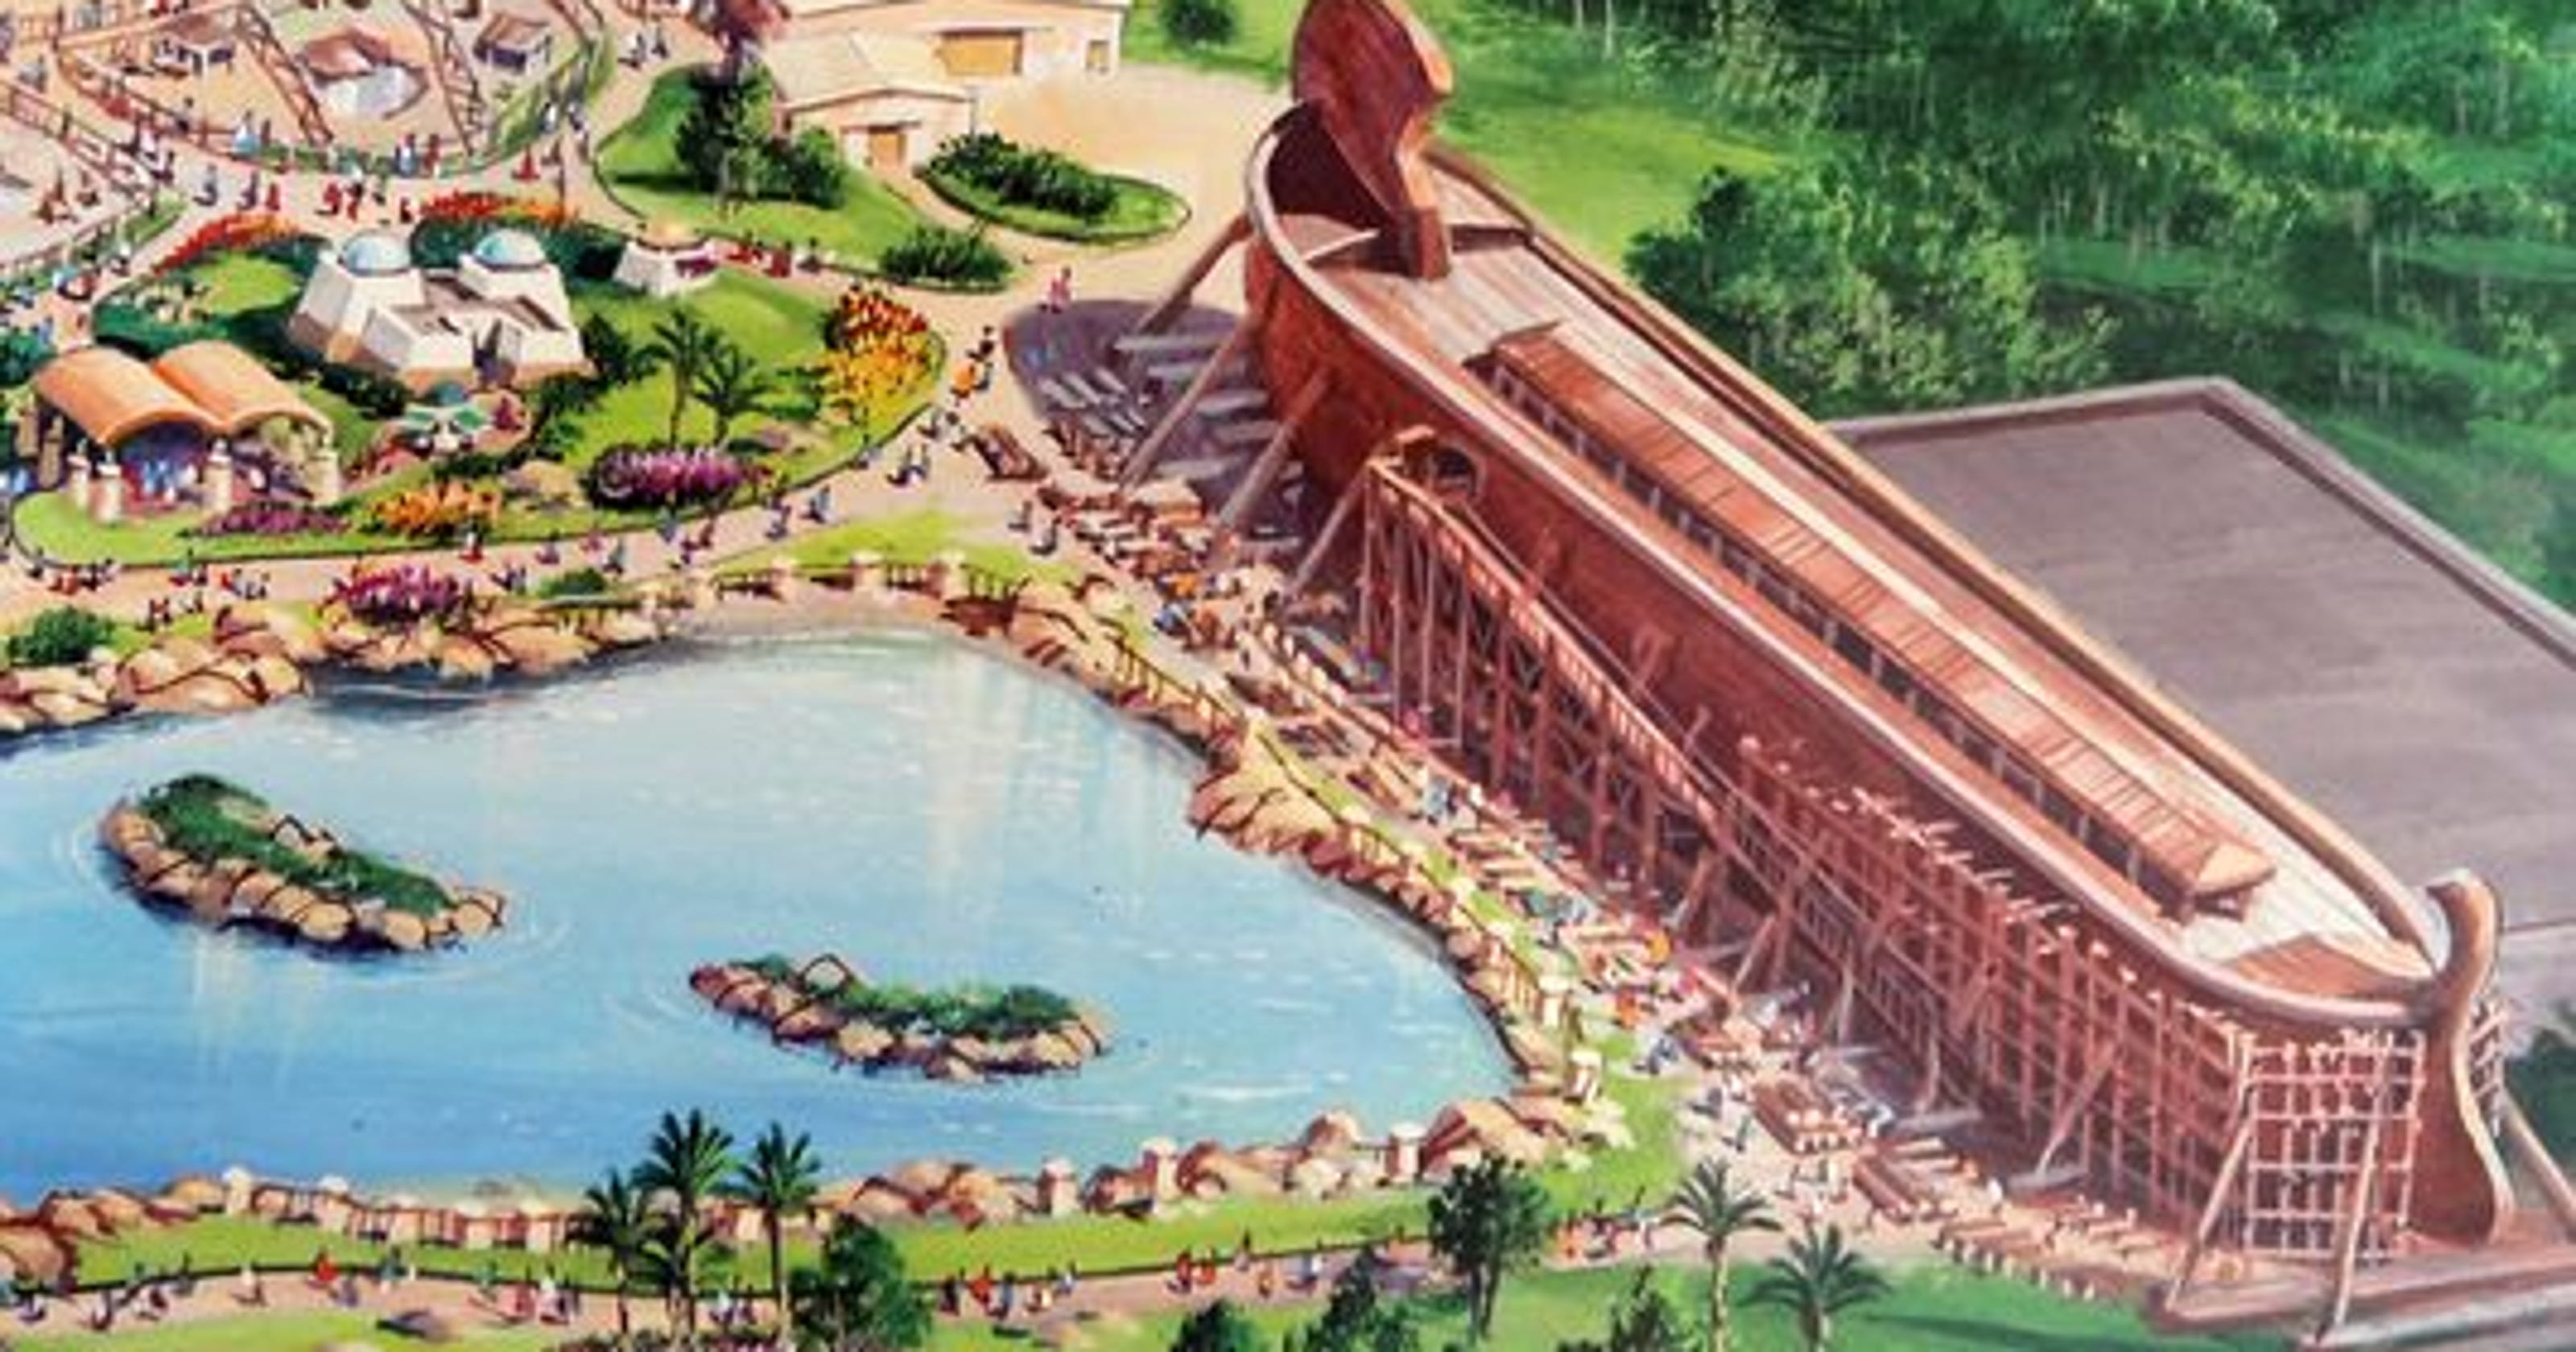 state-will-pay-for-revamped-exit-for-ark-encounter